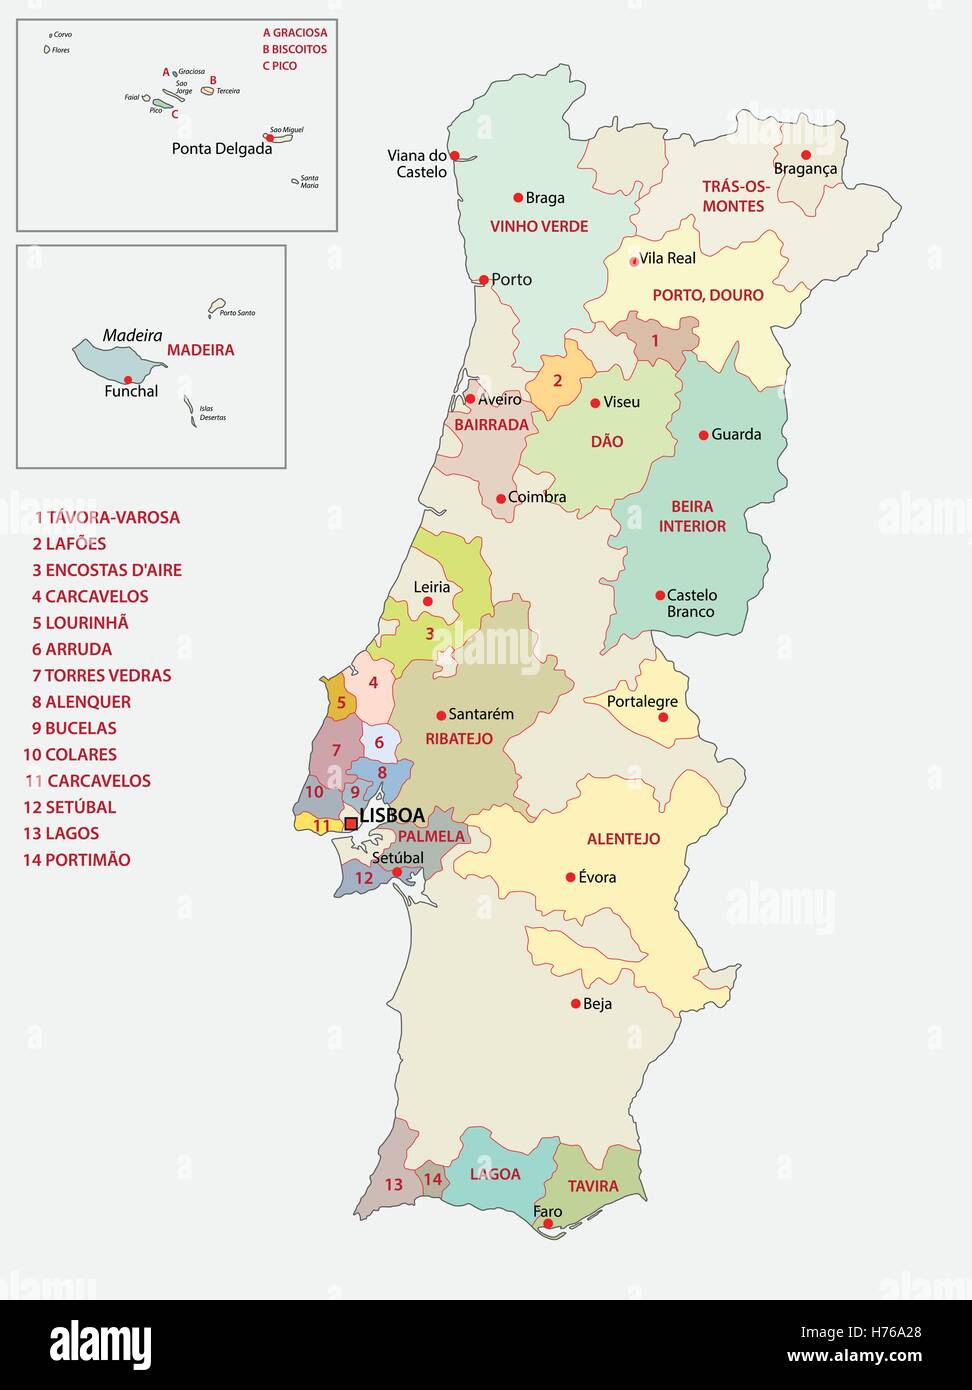 Administrative map of the five regions portugal Vector Image